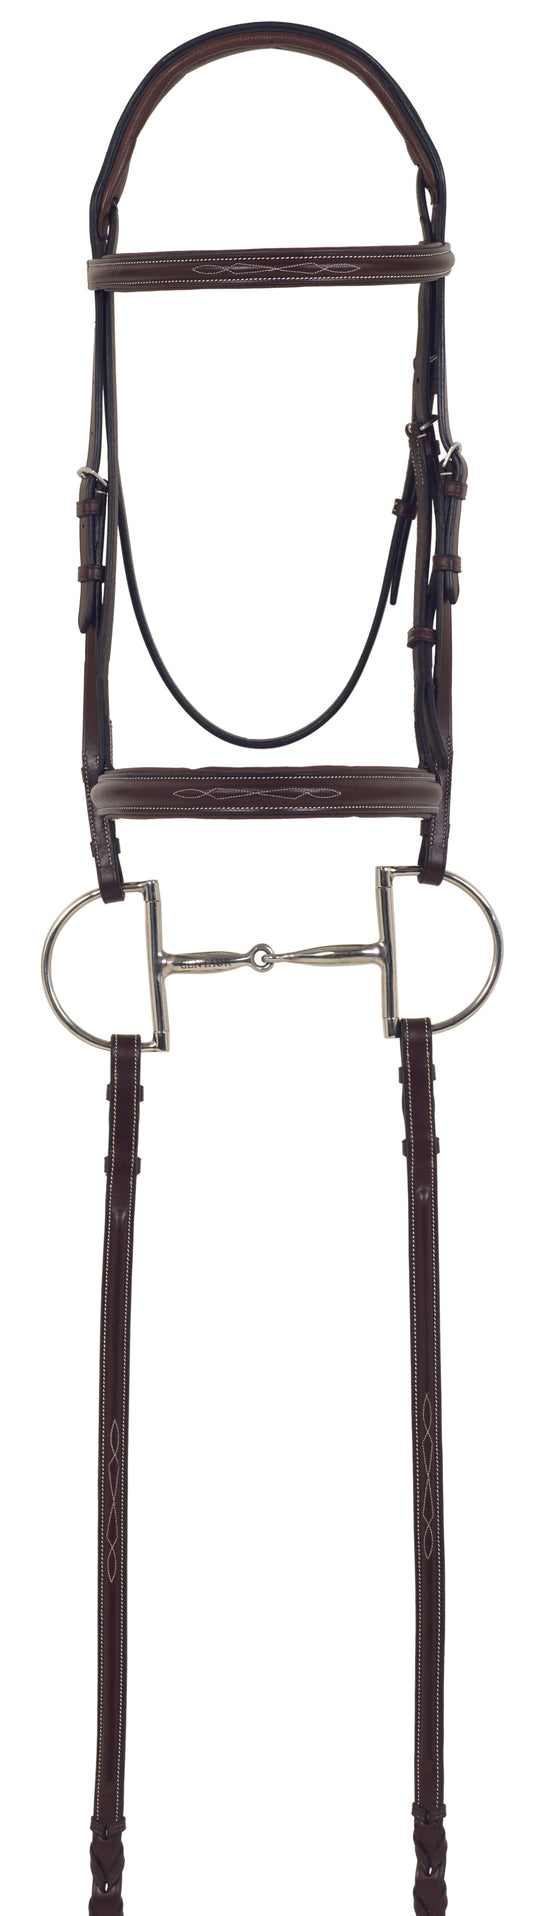 Camelot Gold RCS Fancy Raised Padded Bridle with Reins